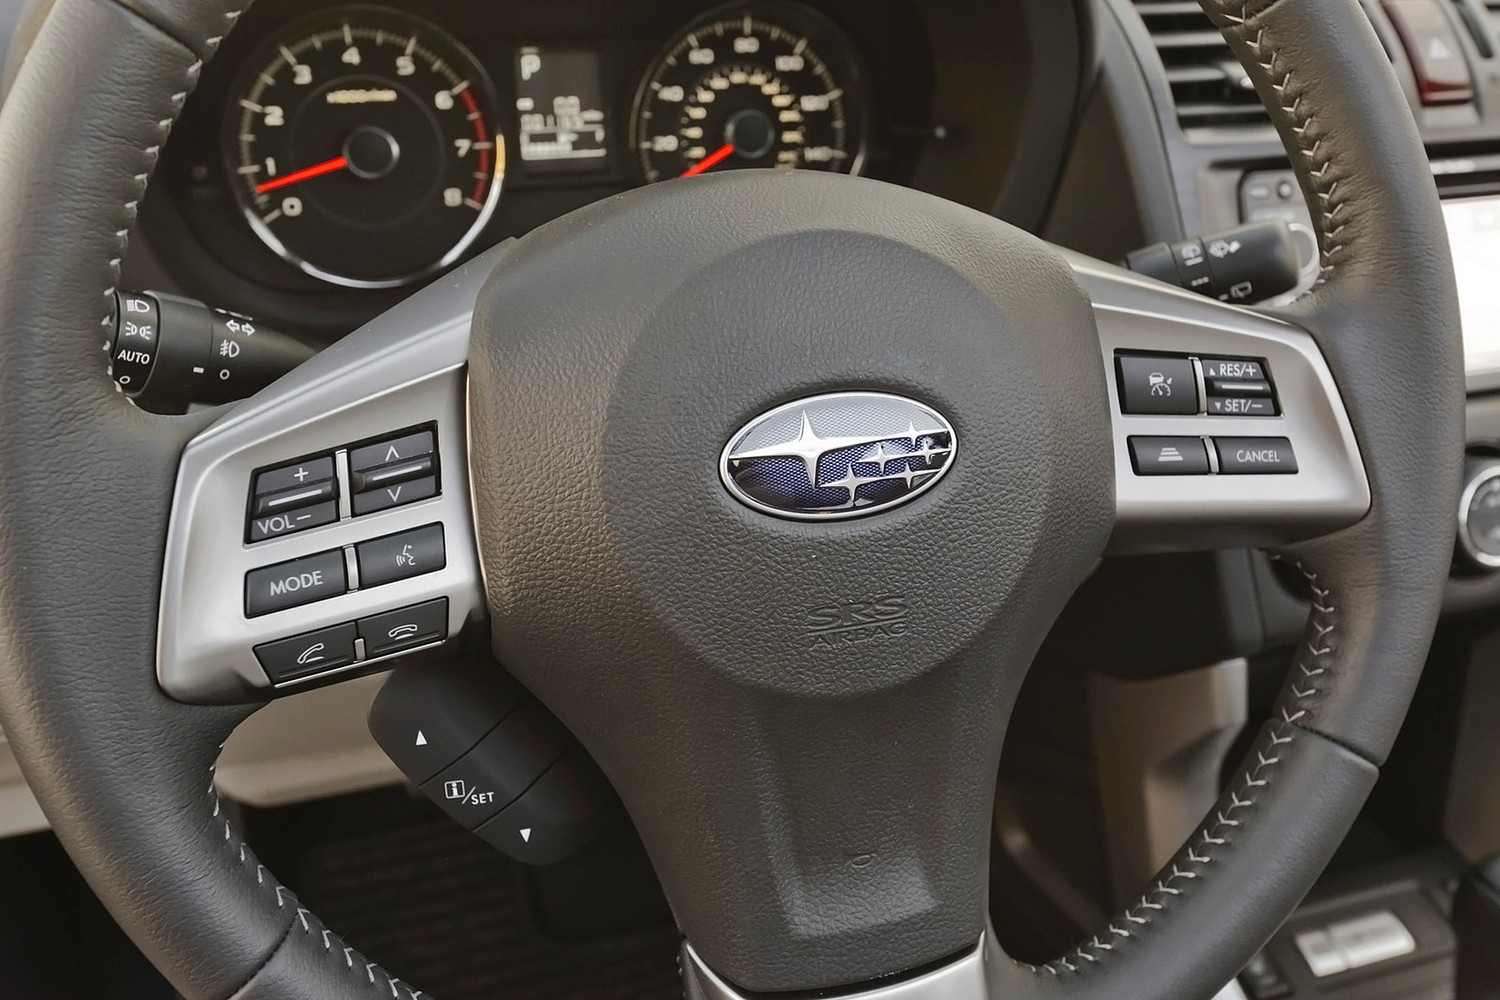 Subaru Forester 2.5i Limited PZEV 4dr SUV Steering Wheel Detail (2015 model year shown)